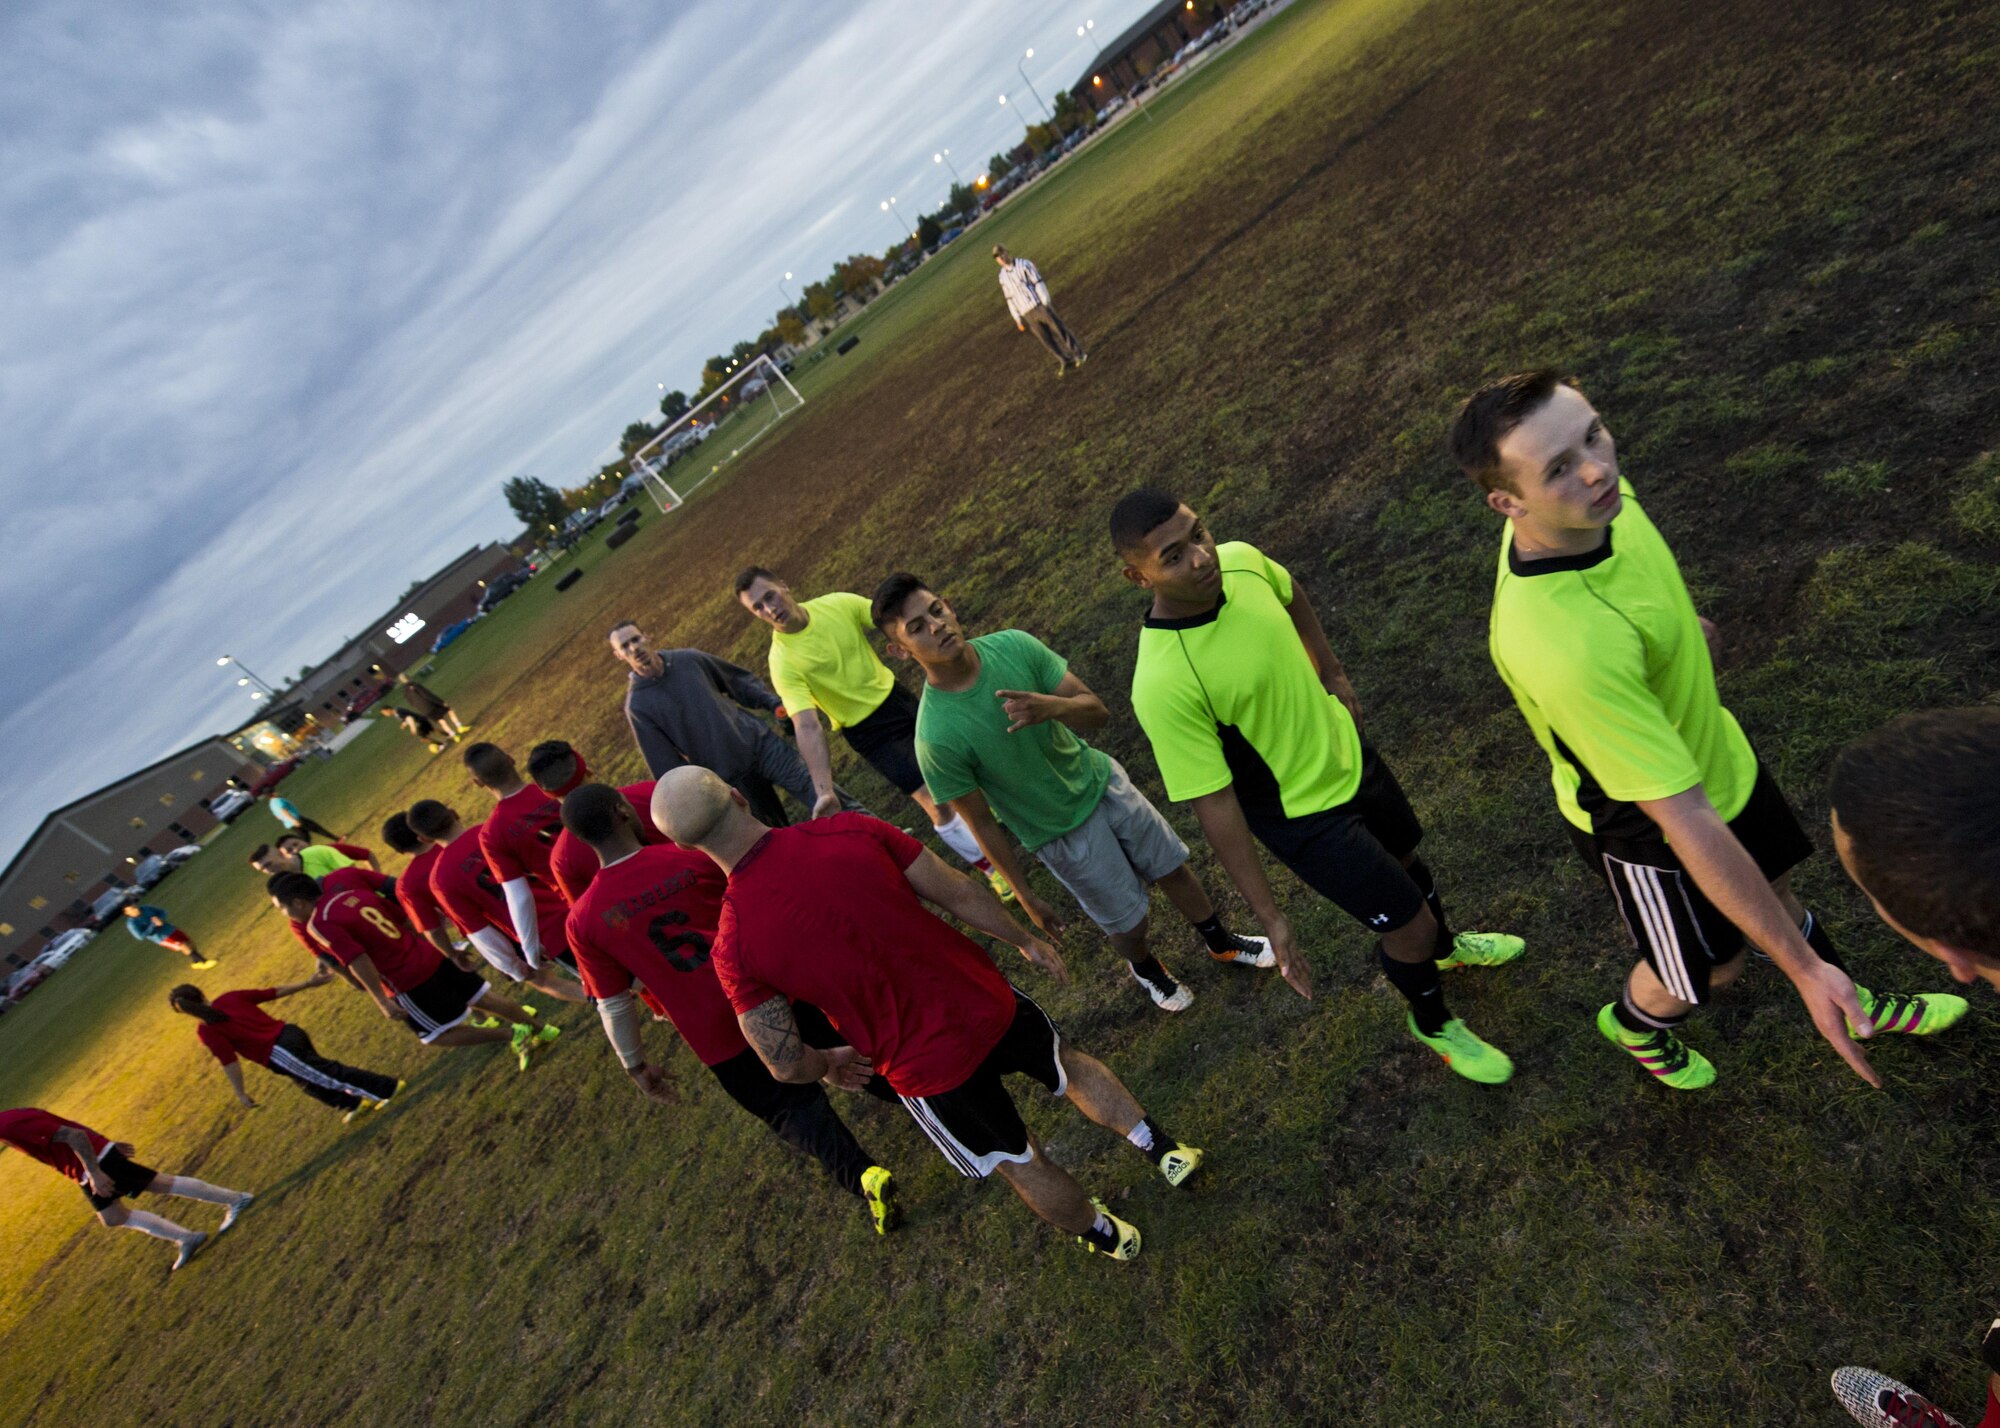 The 5th Security Forces Squadron (yellow) and the 91st Missile Security Forces Squadron (red) shake hands during the first game in the intramural soccer championship tournament at Minot Air Force Base, N.D., Sept. 21, 2016. The 91st MSFS advanced to the next round against the 5th Maintenance Squadron. (U.S. Air Force photo/Airman 1st Class J.T. Armstrong)